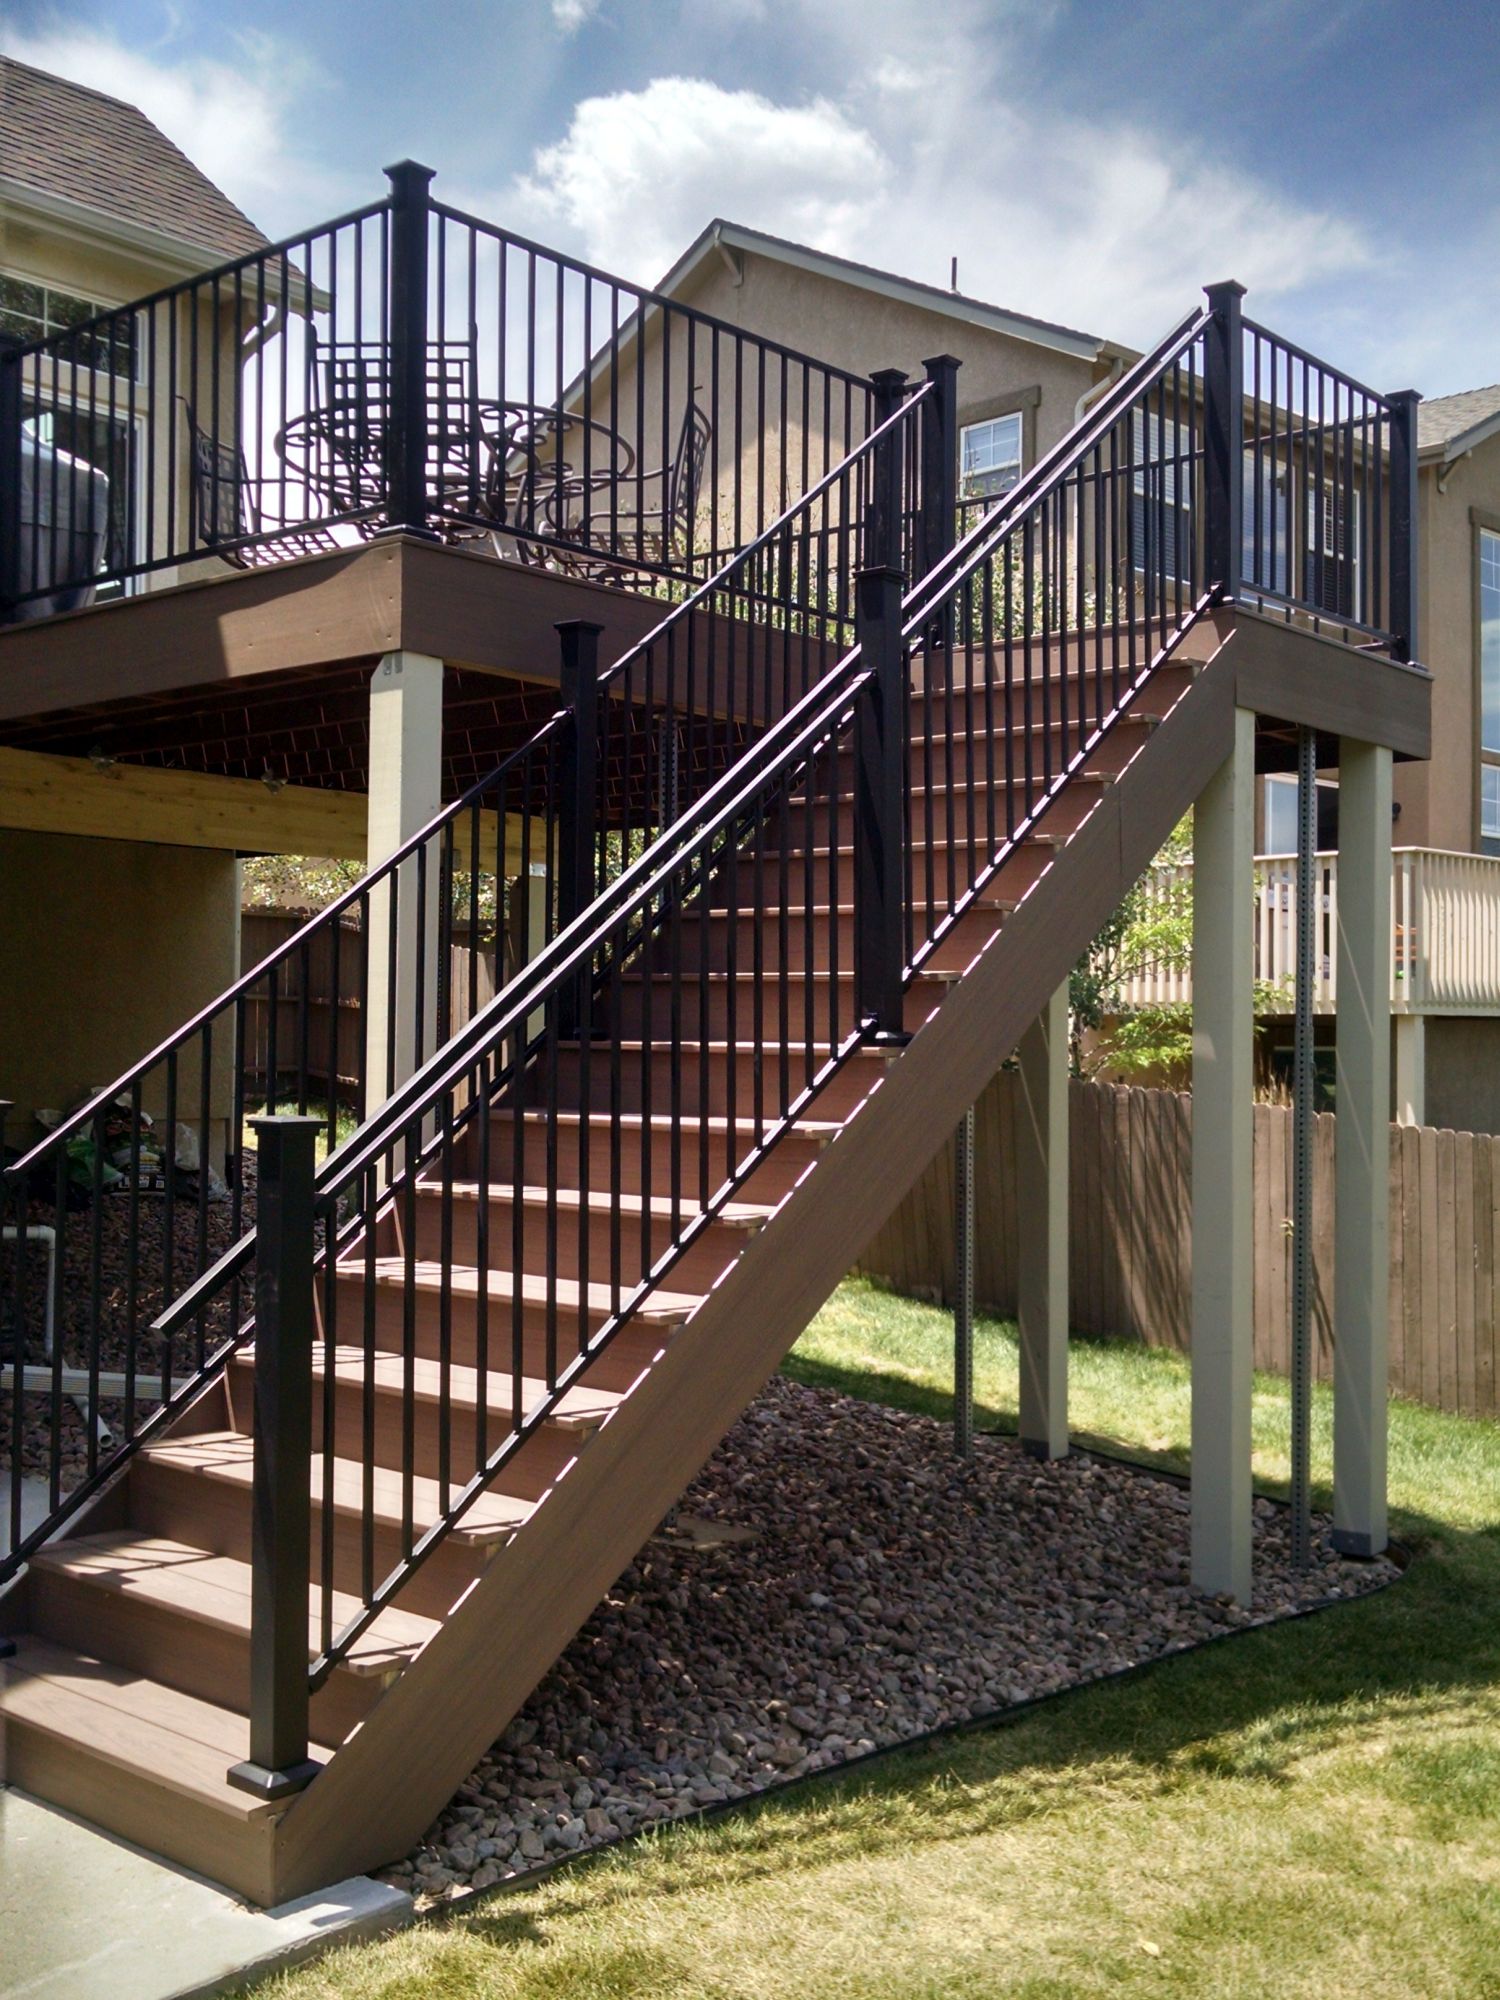 An elevated composite deck with a 4'-wide closed step staircase. The railing is a metal panel system with handrail for safety.